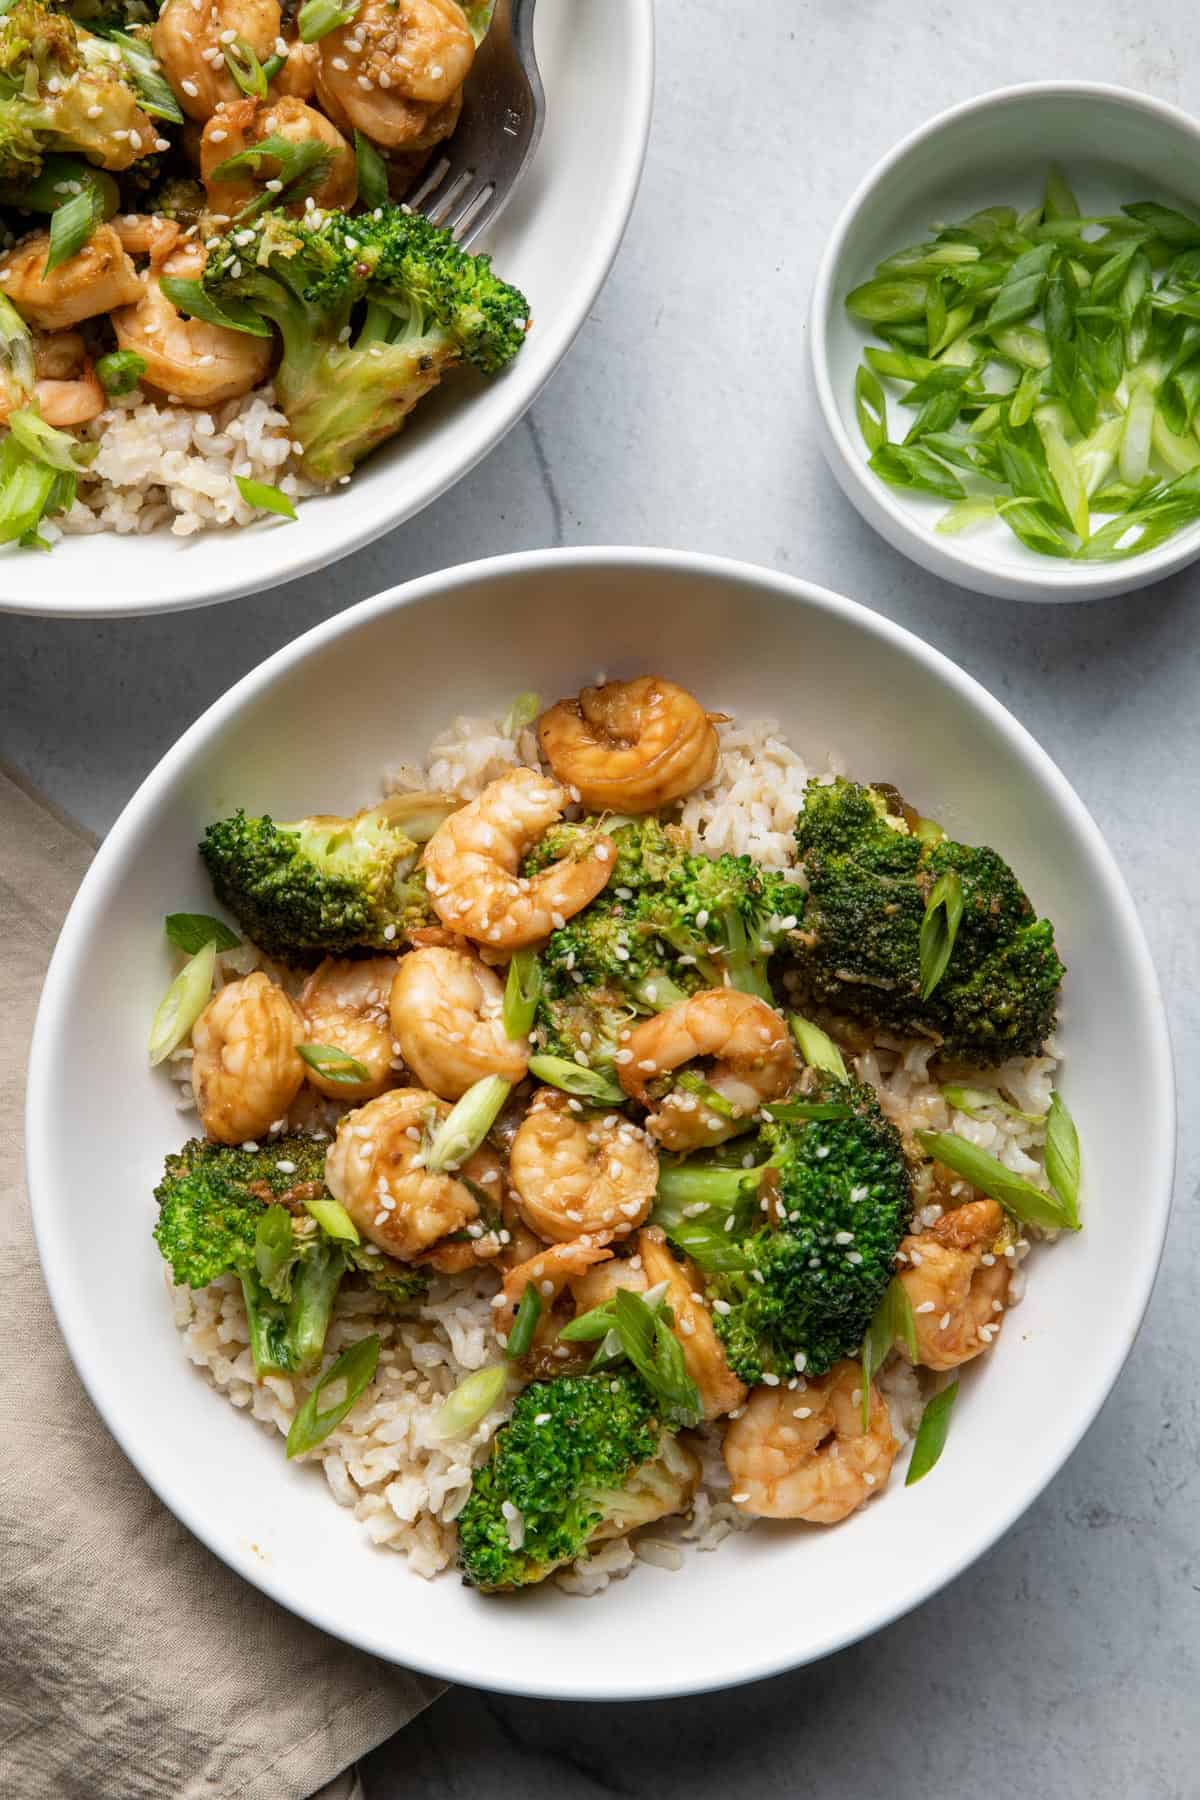 Shrimp and broccoli stir fry in bowls over brown rice